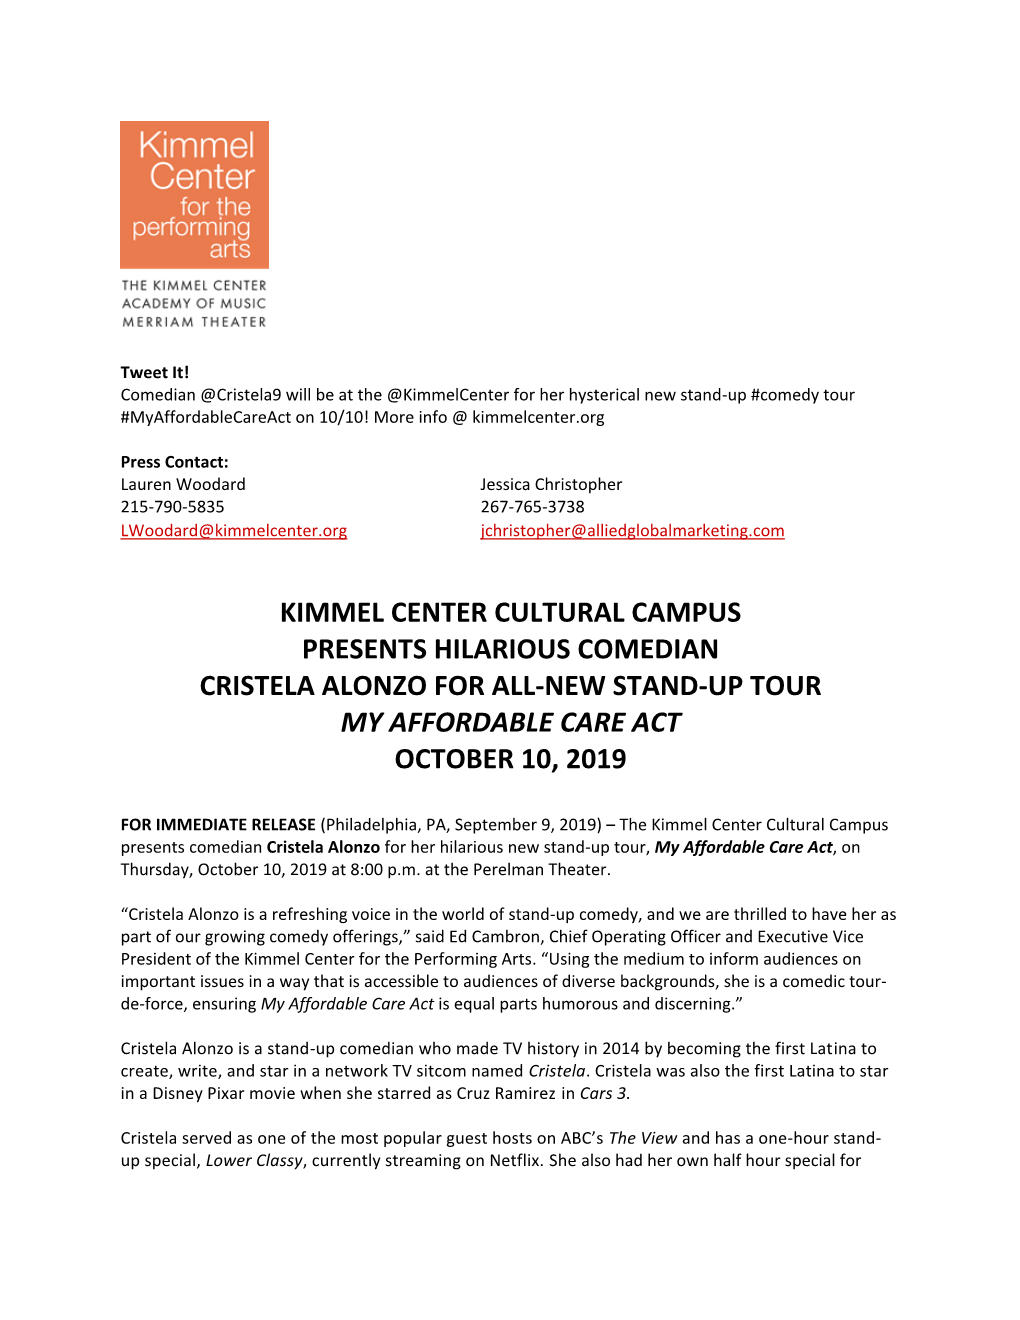 Kimmel Center Cultural Campus Presents Hilarious Comedian Cristela Alonzo for All-New Stand-Up Tour My Affordable Care Act October 10, 2019